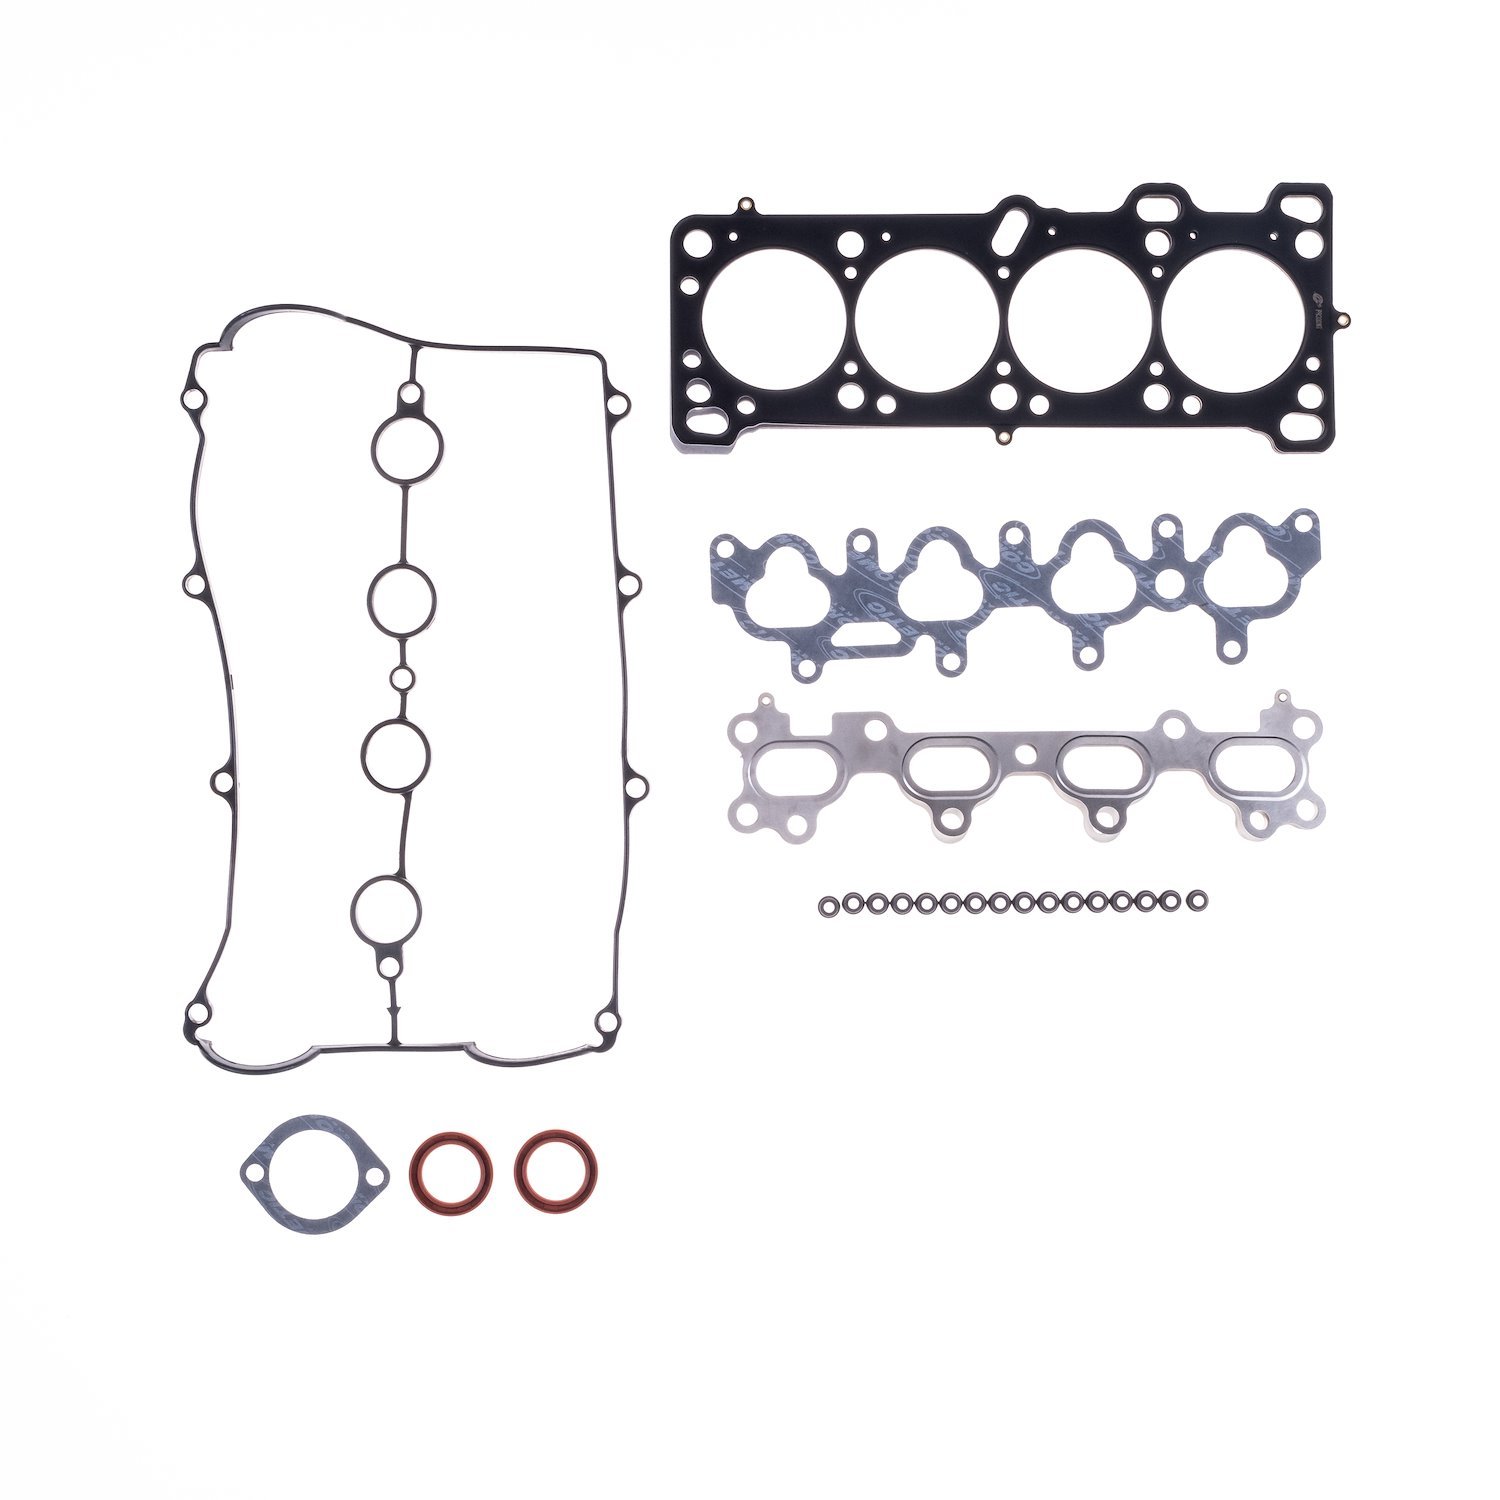 Top End Street Pro Gasket Kit for Select